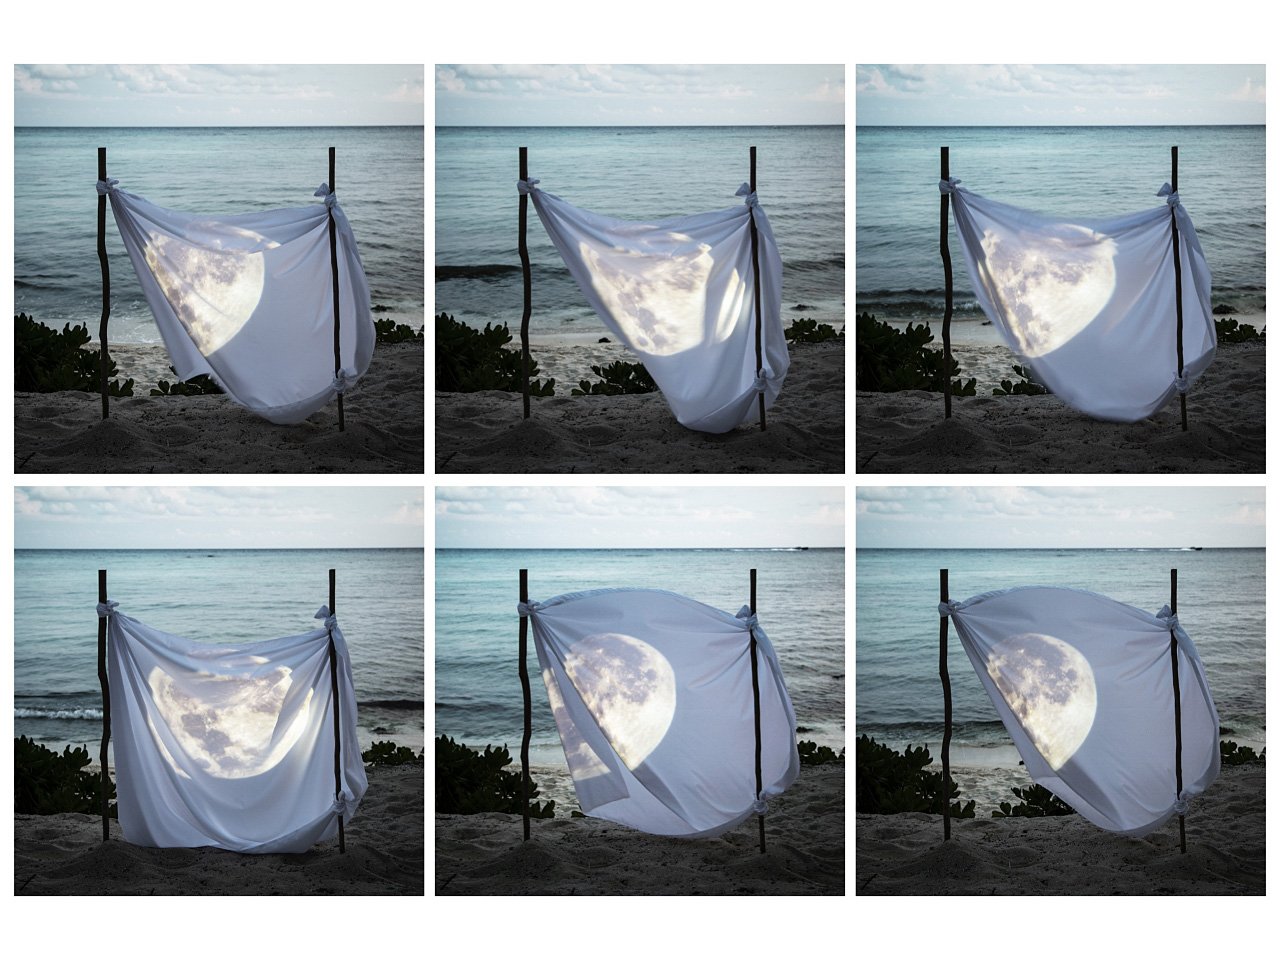  Trapping the Moon ©&nbsp;Patricia Lagarde, 2022. A project for Maroma. A Belmond Hotel 